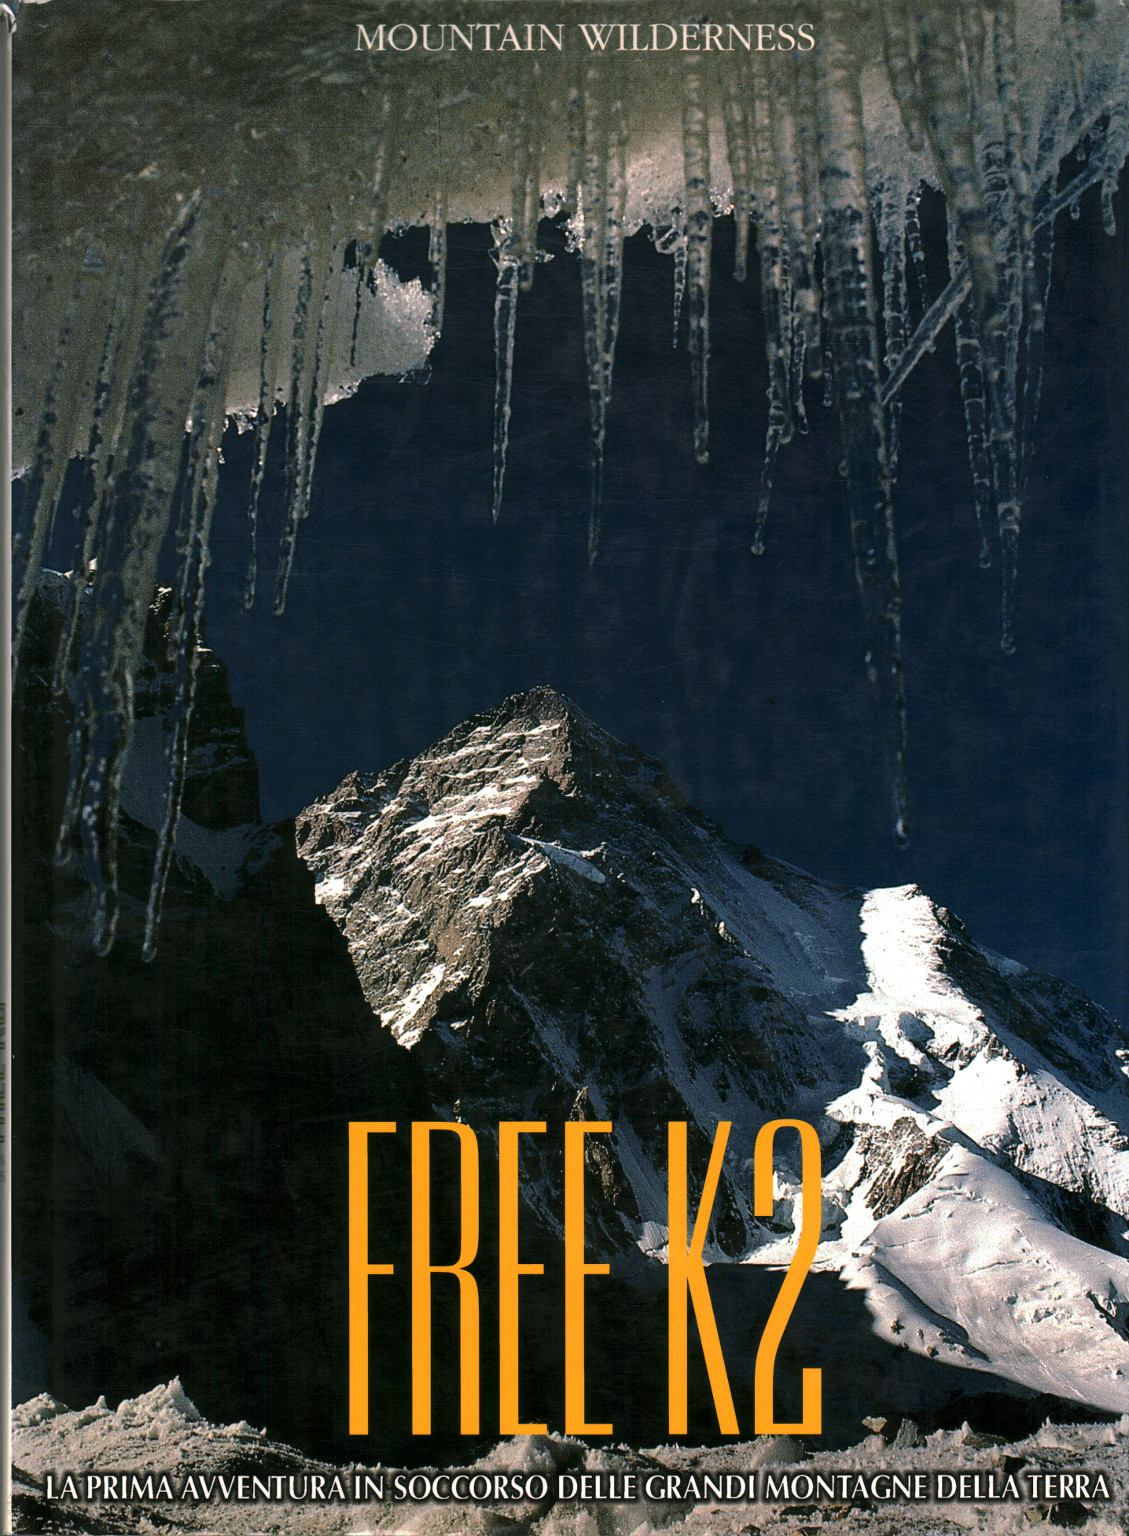 Free K2. The first adventure in aid of the great, s.a.